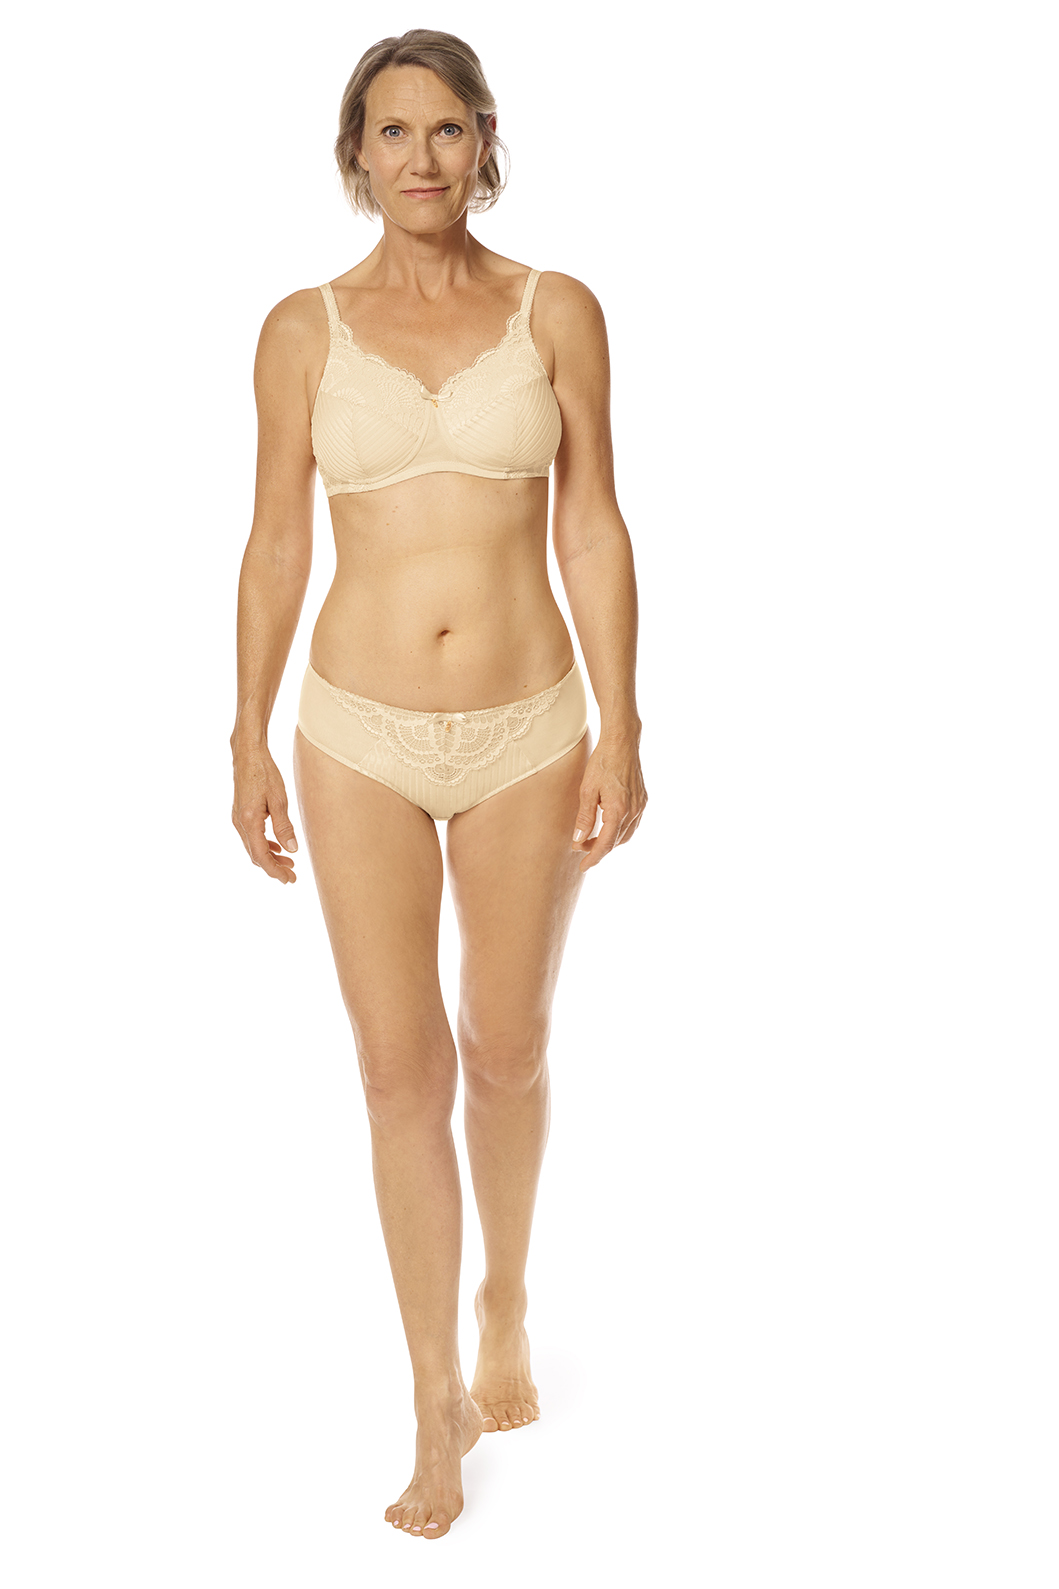 Aline wire-free padded bra – The Pencil Test